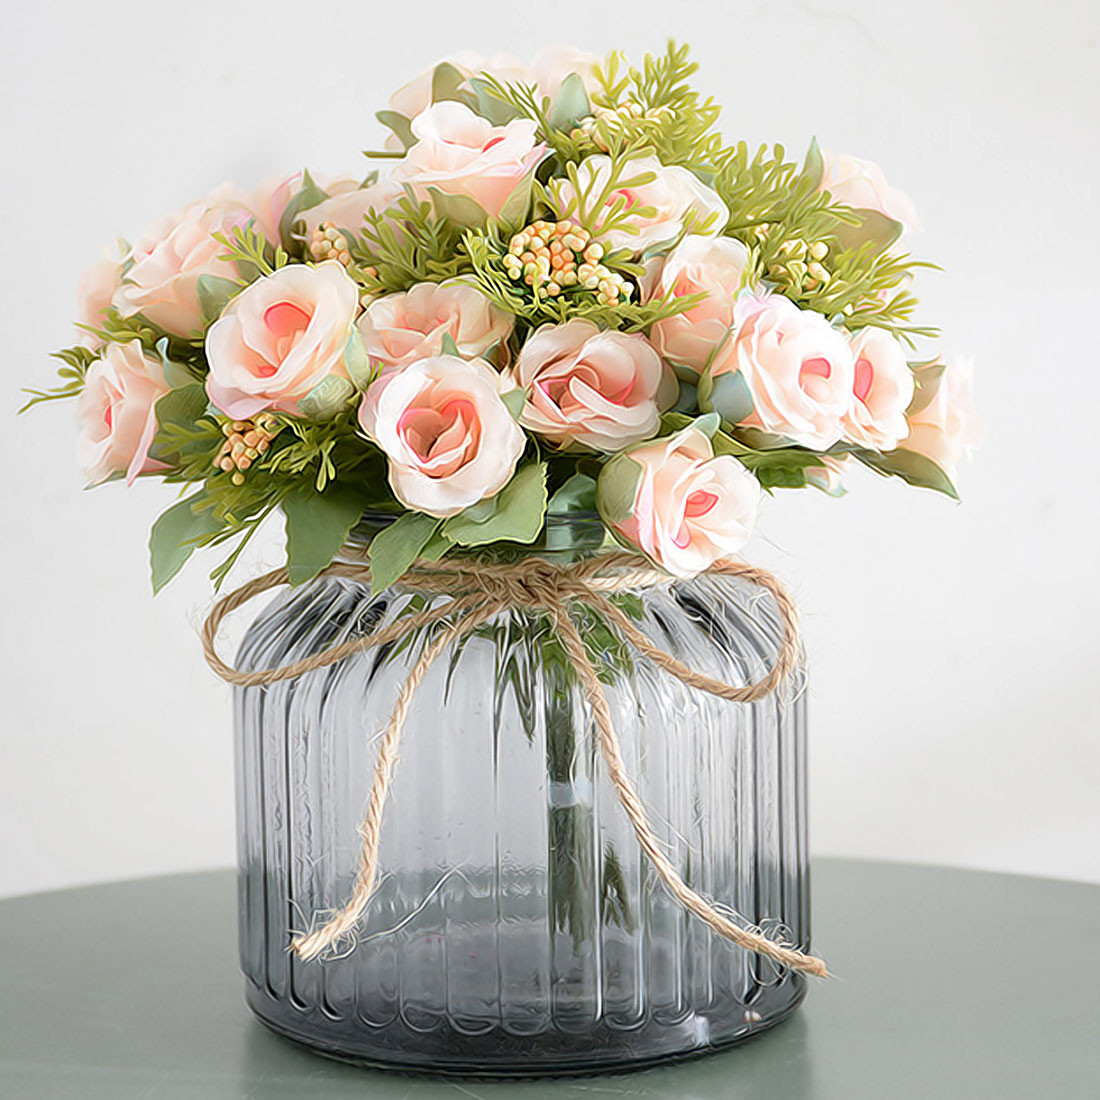 22 Great Flower Vase with Artificial Flowers Online Shopping 2024 free download flower vase with artificial flowers online shopping of small bud silk roses simulation flowers artificial flowers 13 heads inside total width20cm 1cm0 4 inch